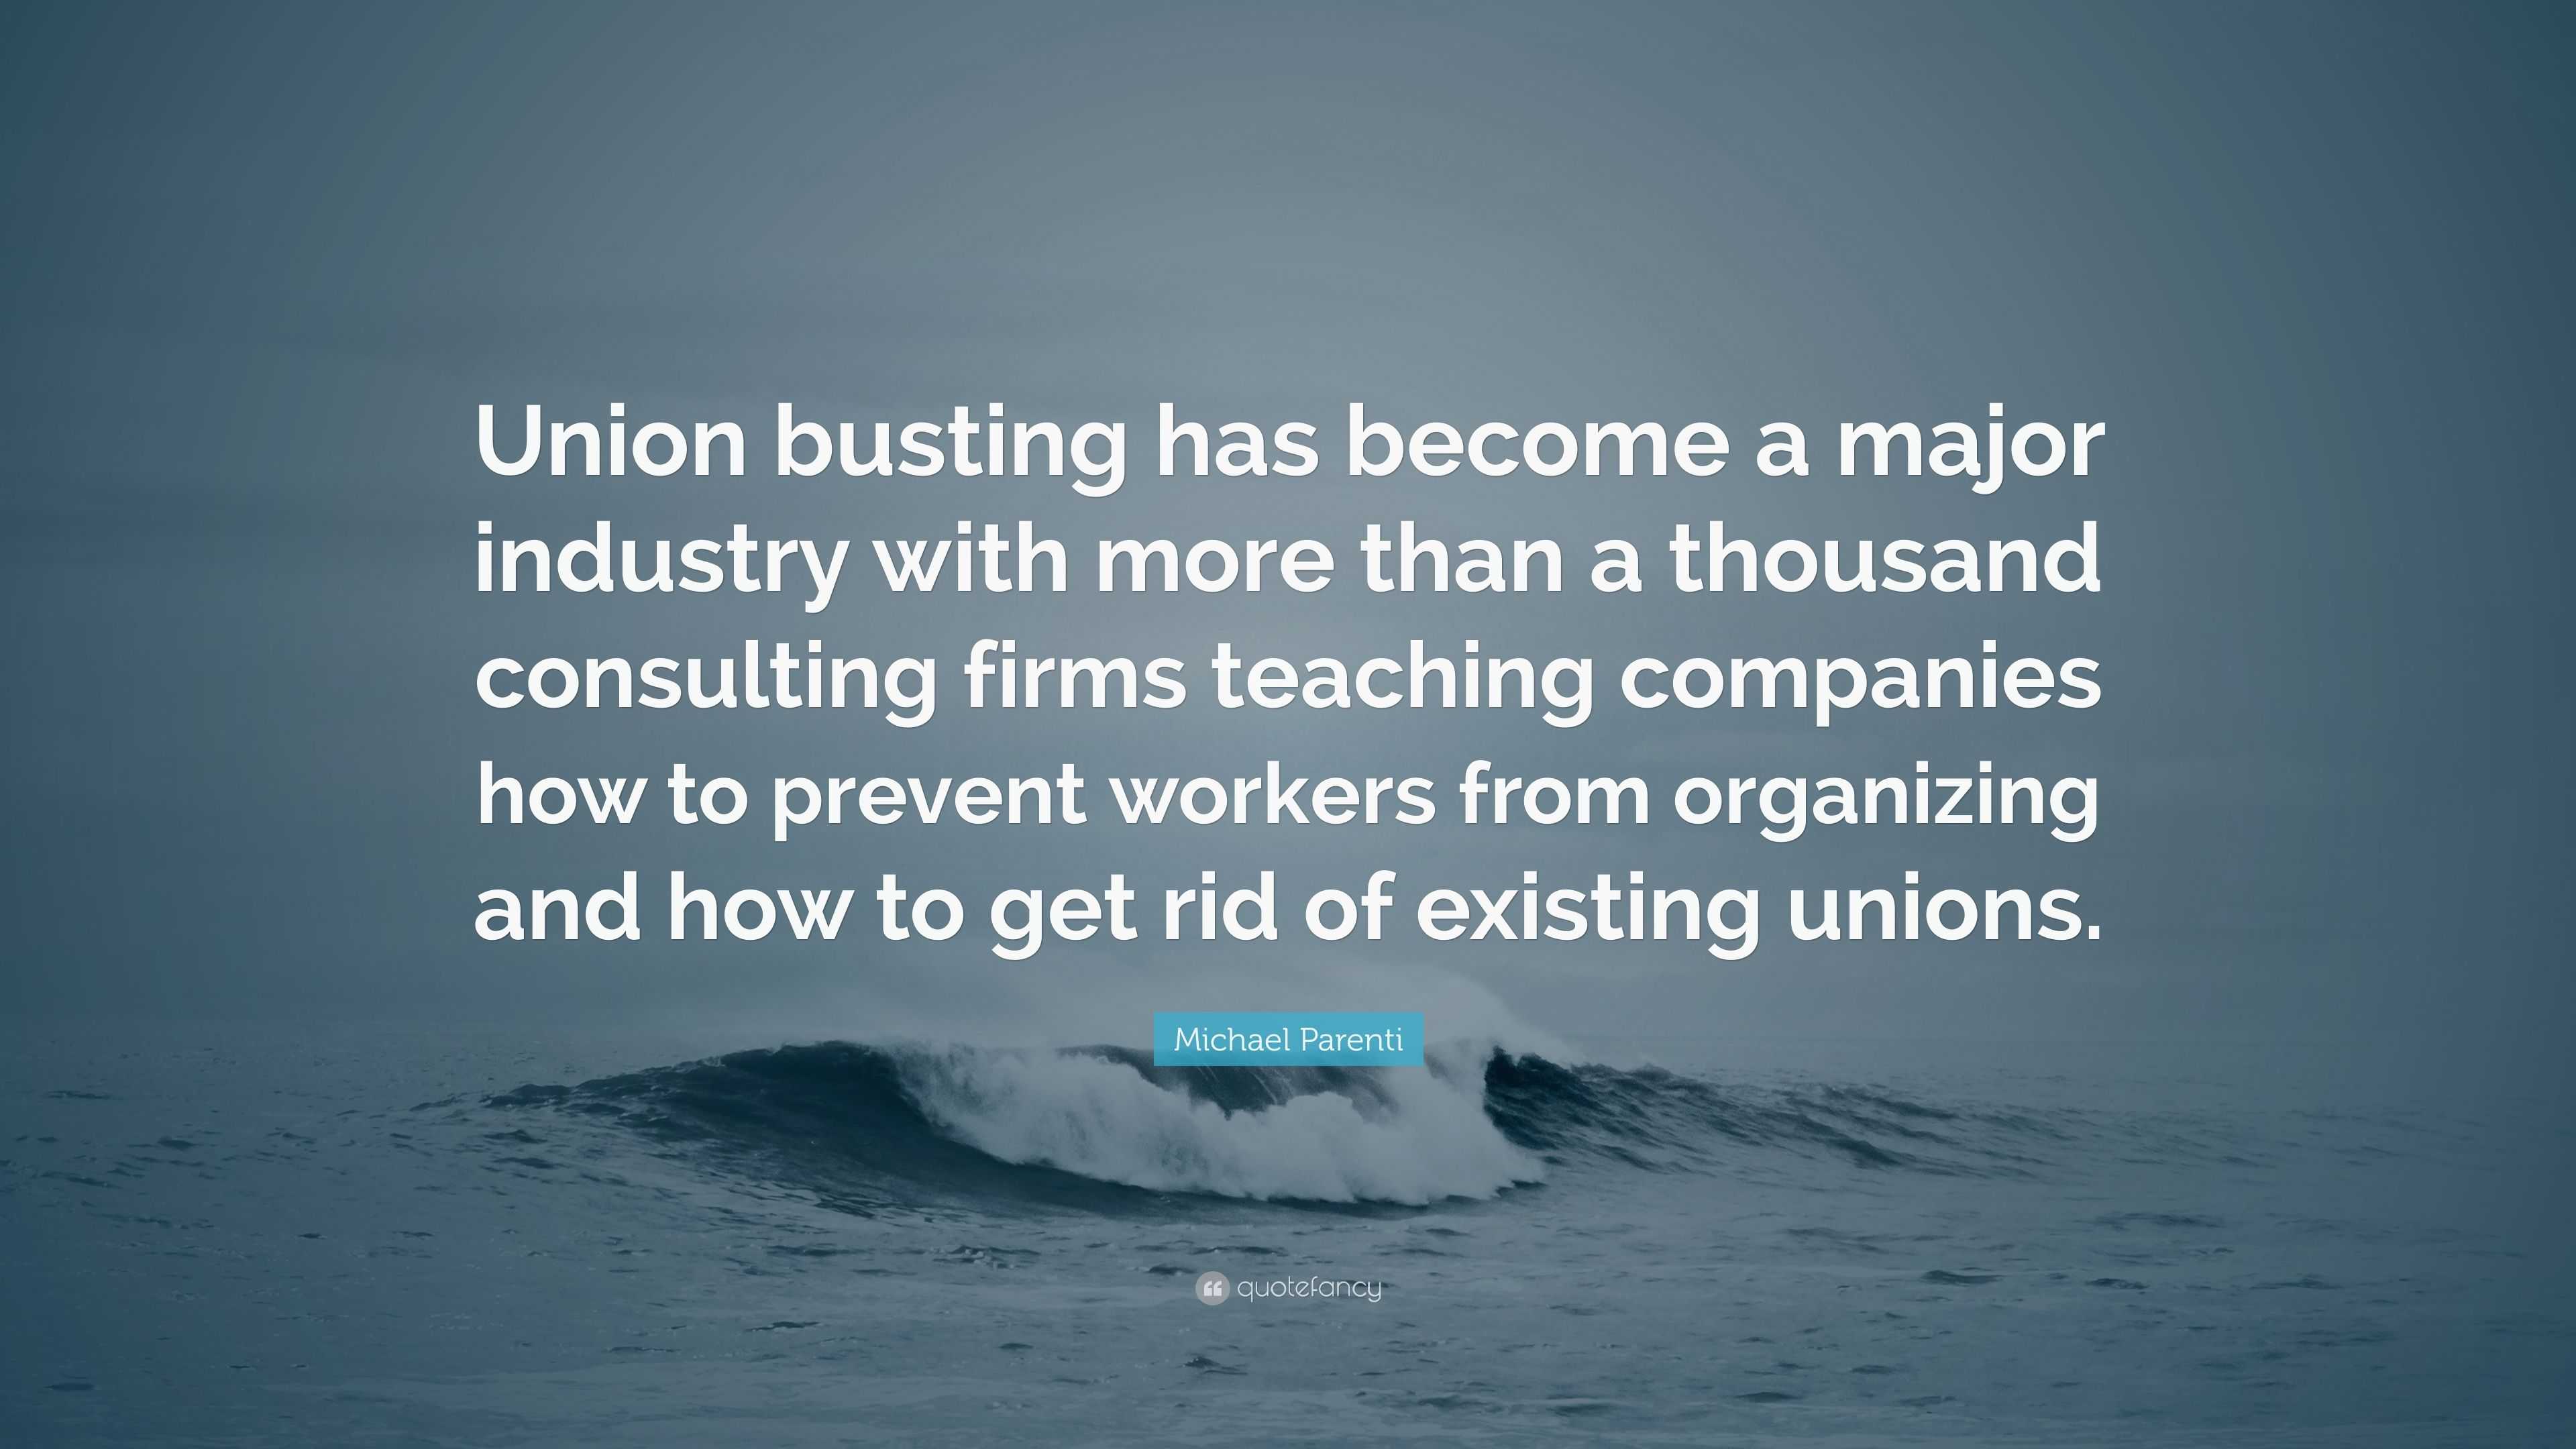 Michael Parenti Quote: “Union busting has become a major industry